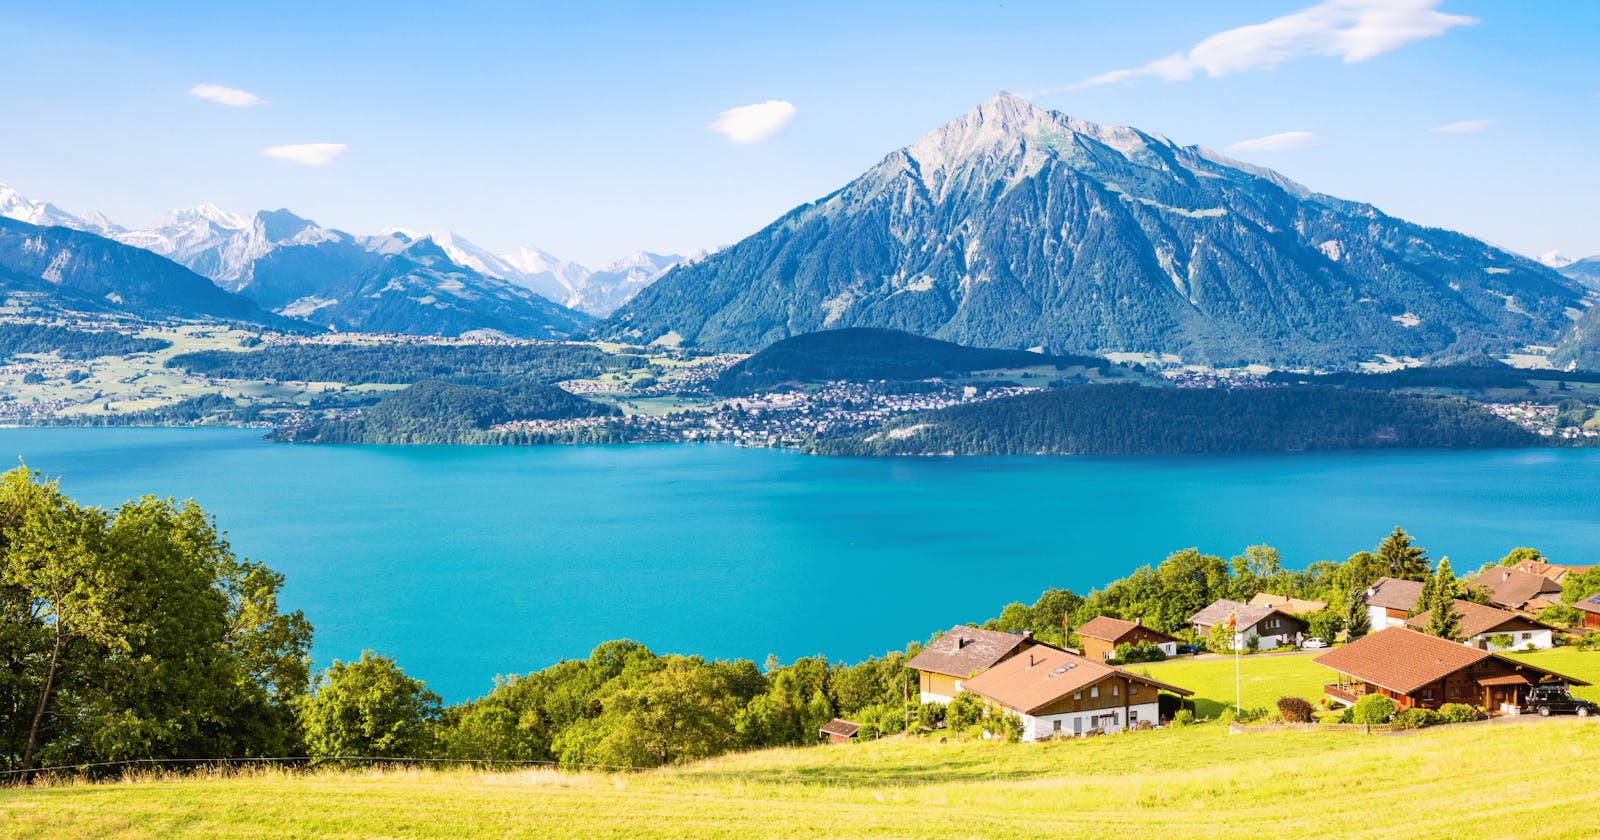 Planning a Romantic Getaway in Switzerland: The Best Places for Couples